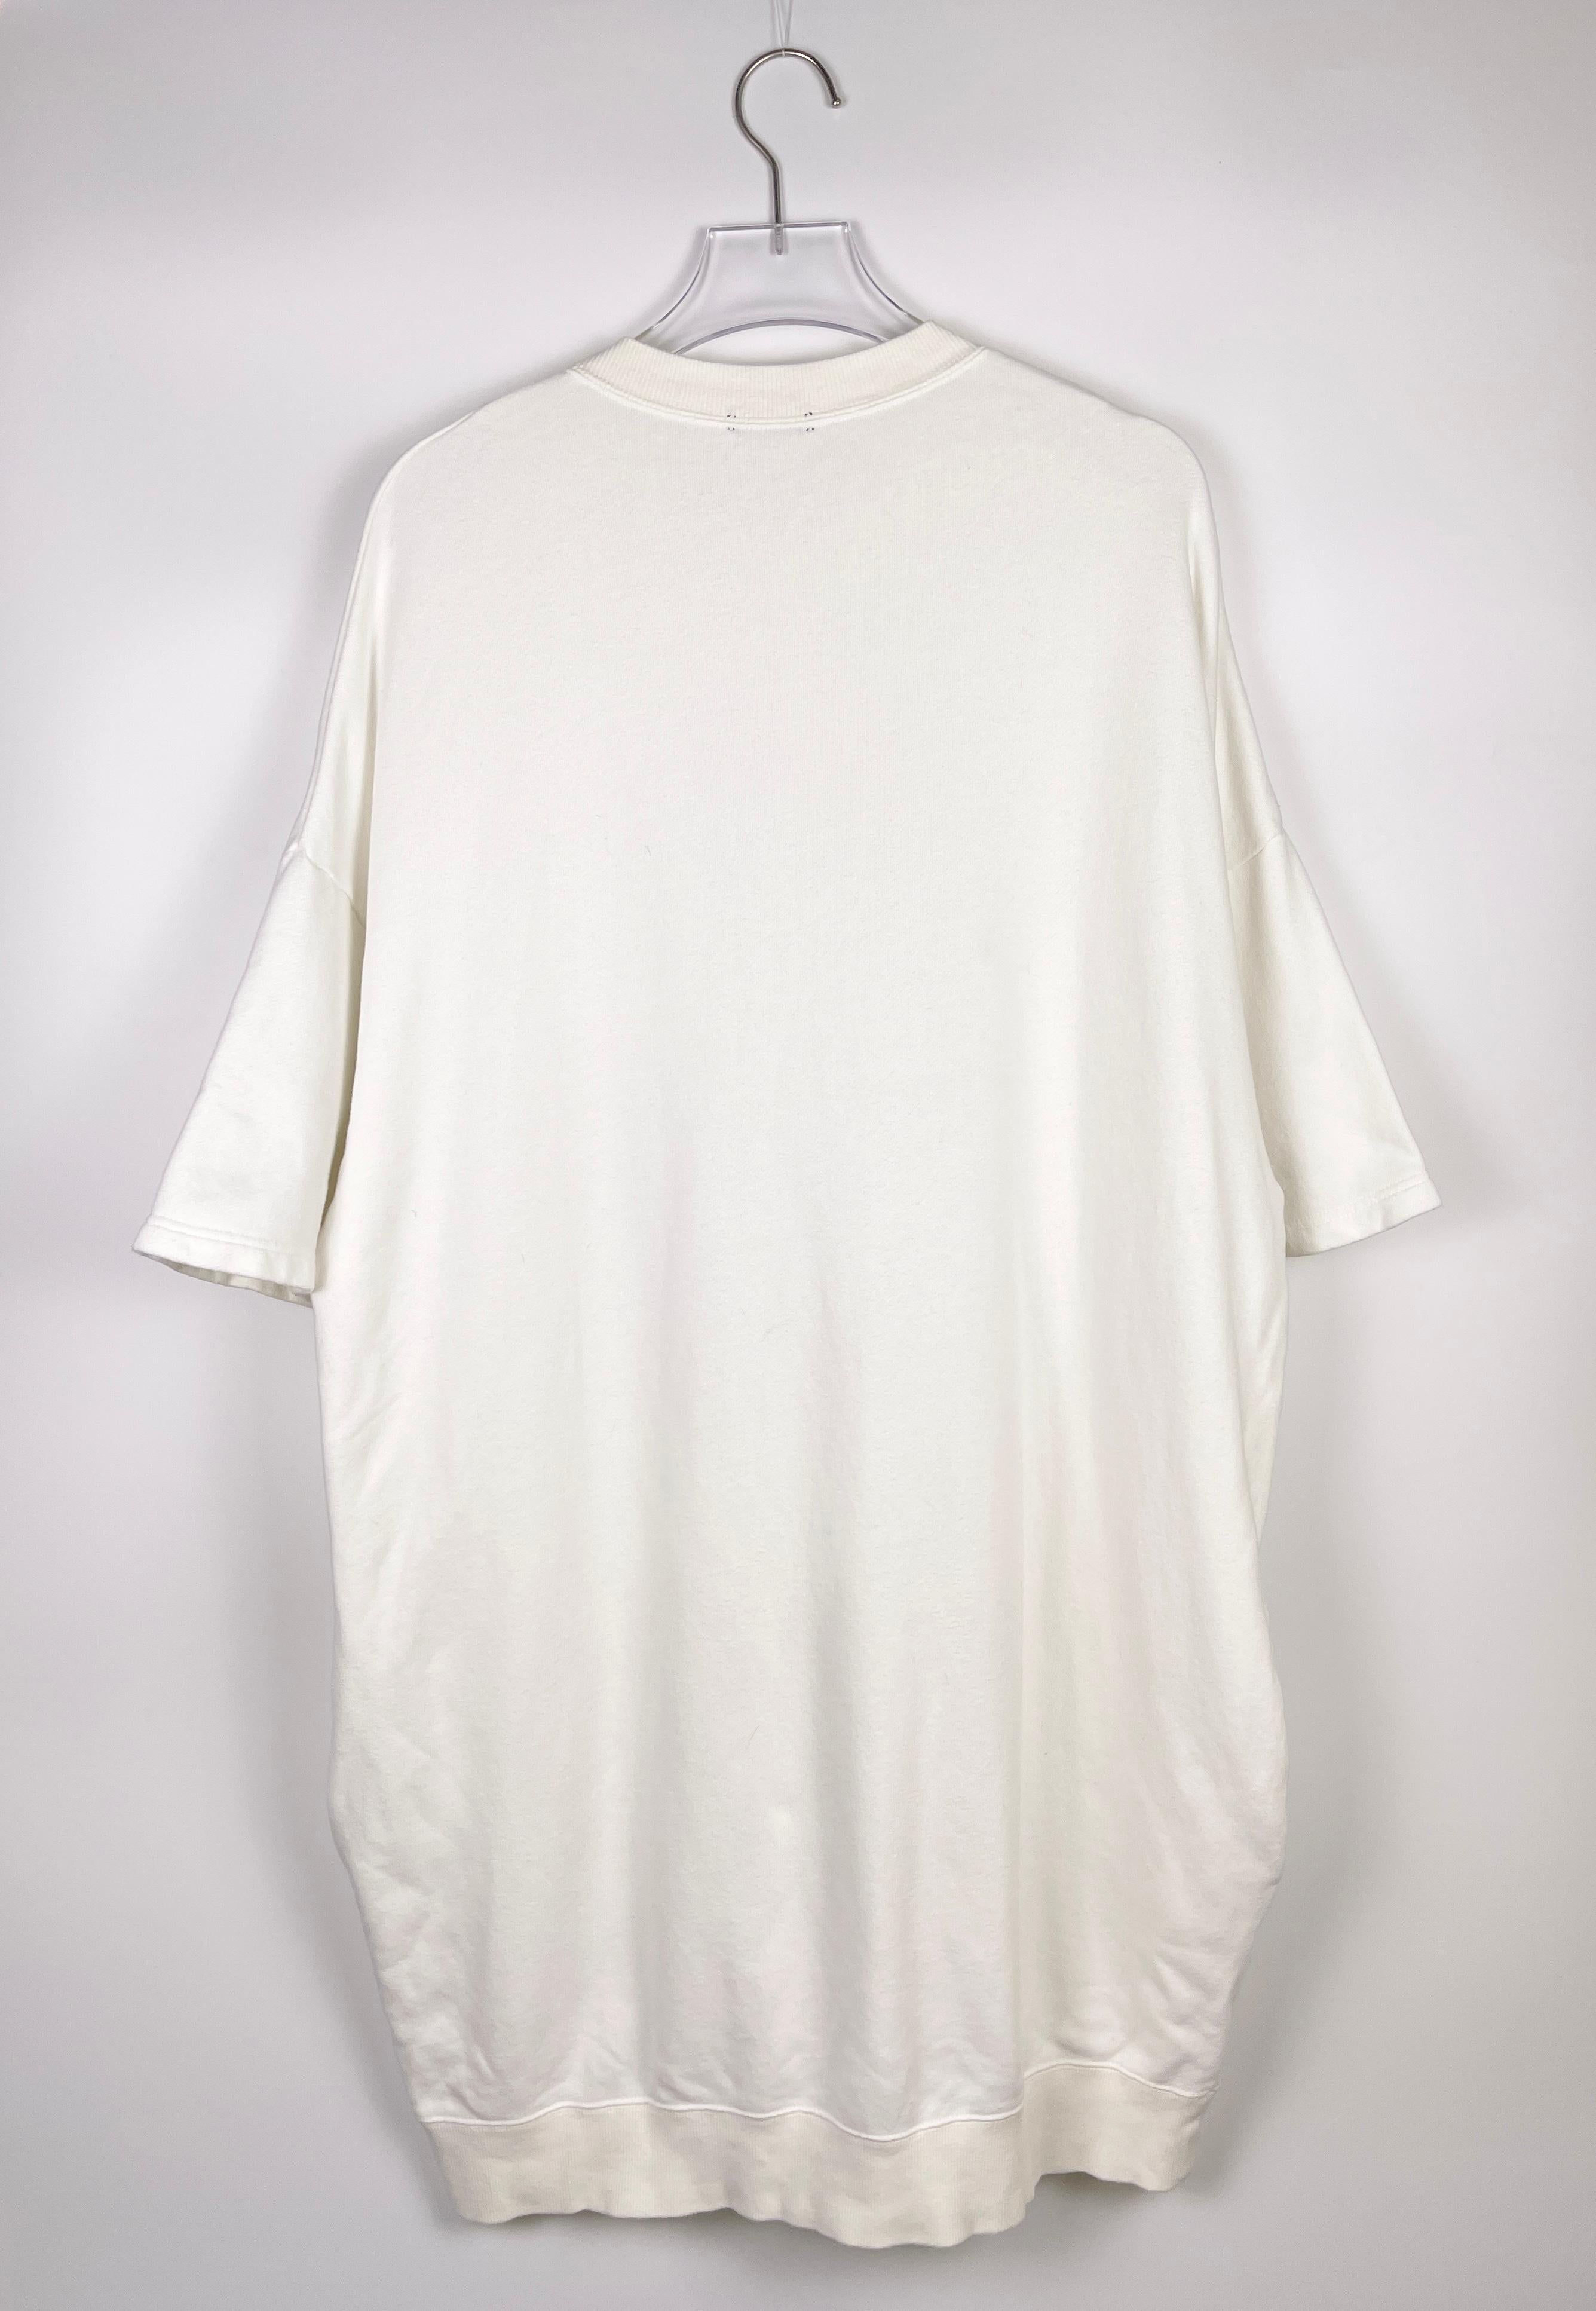 Bigger than any Balenciaga T-Shirt is the perfect description to sum this piece up. The piece was part of early 2000's release in the DAVF collection, it featured the season iconic electric symbol, with an abbreviation of 